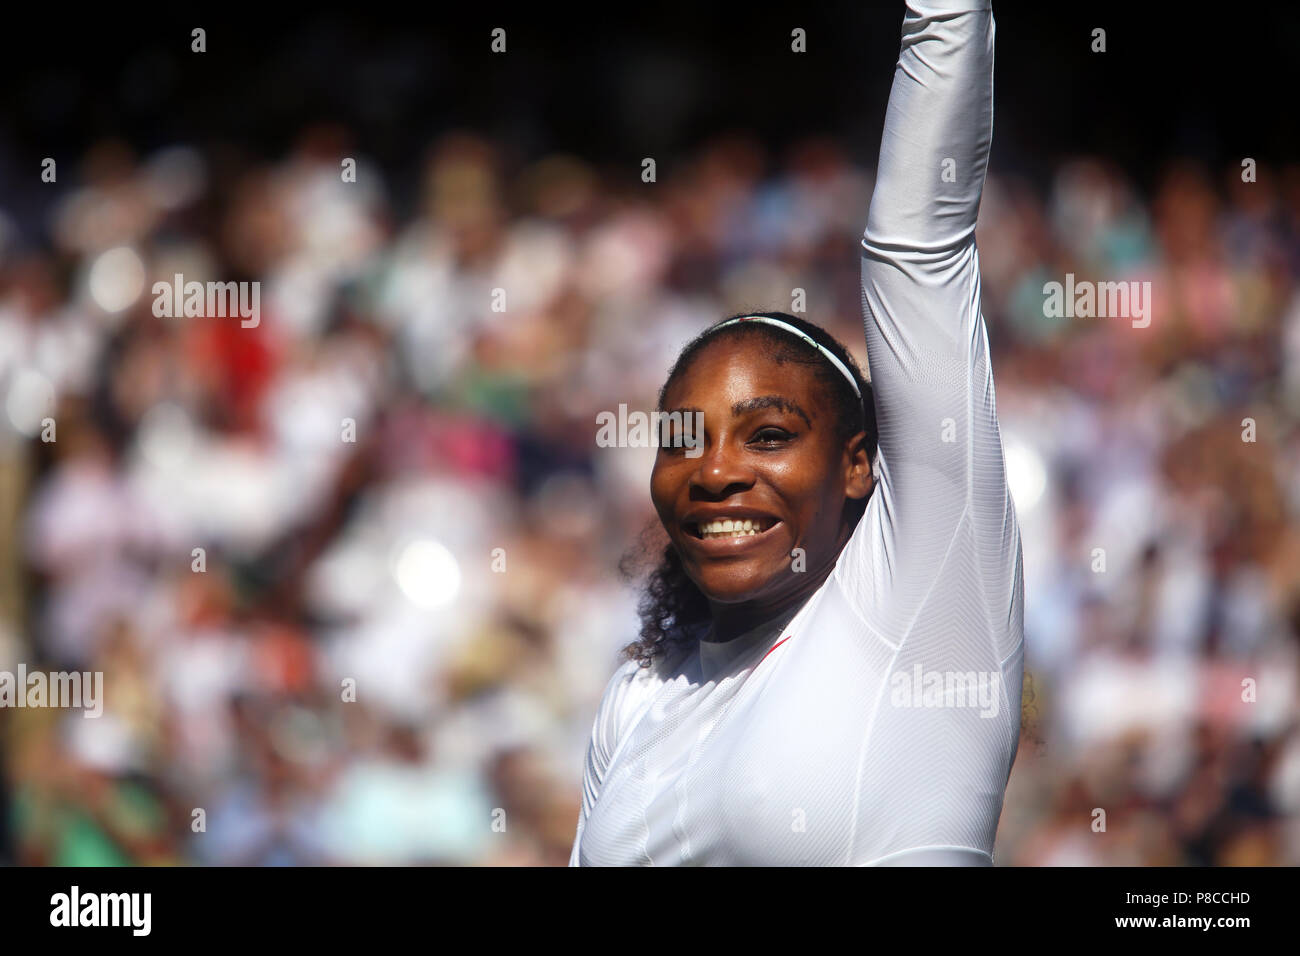 London, UK. 10th July, 2018.  Wimbledon Tennis: Serena Williams acknowledges the crowd after defeating Italy's Camila Georgi to advance to the semi-finals at Wimbledon today. Credit: Adam Stoltman/Alamy Live News Stock Photo